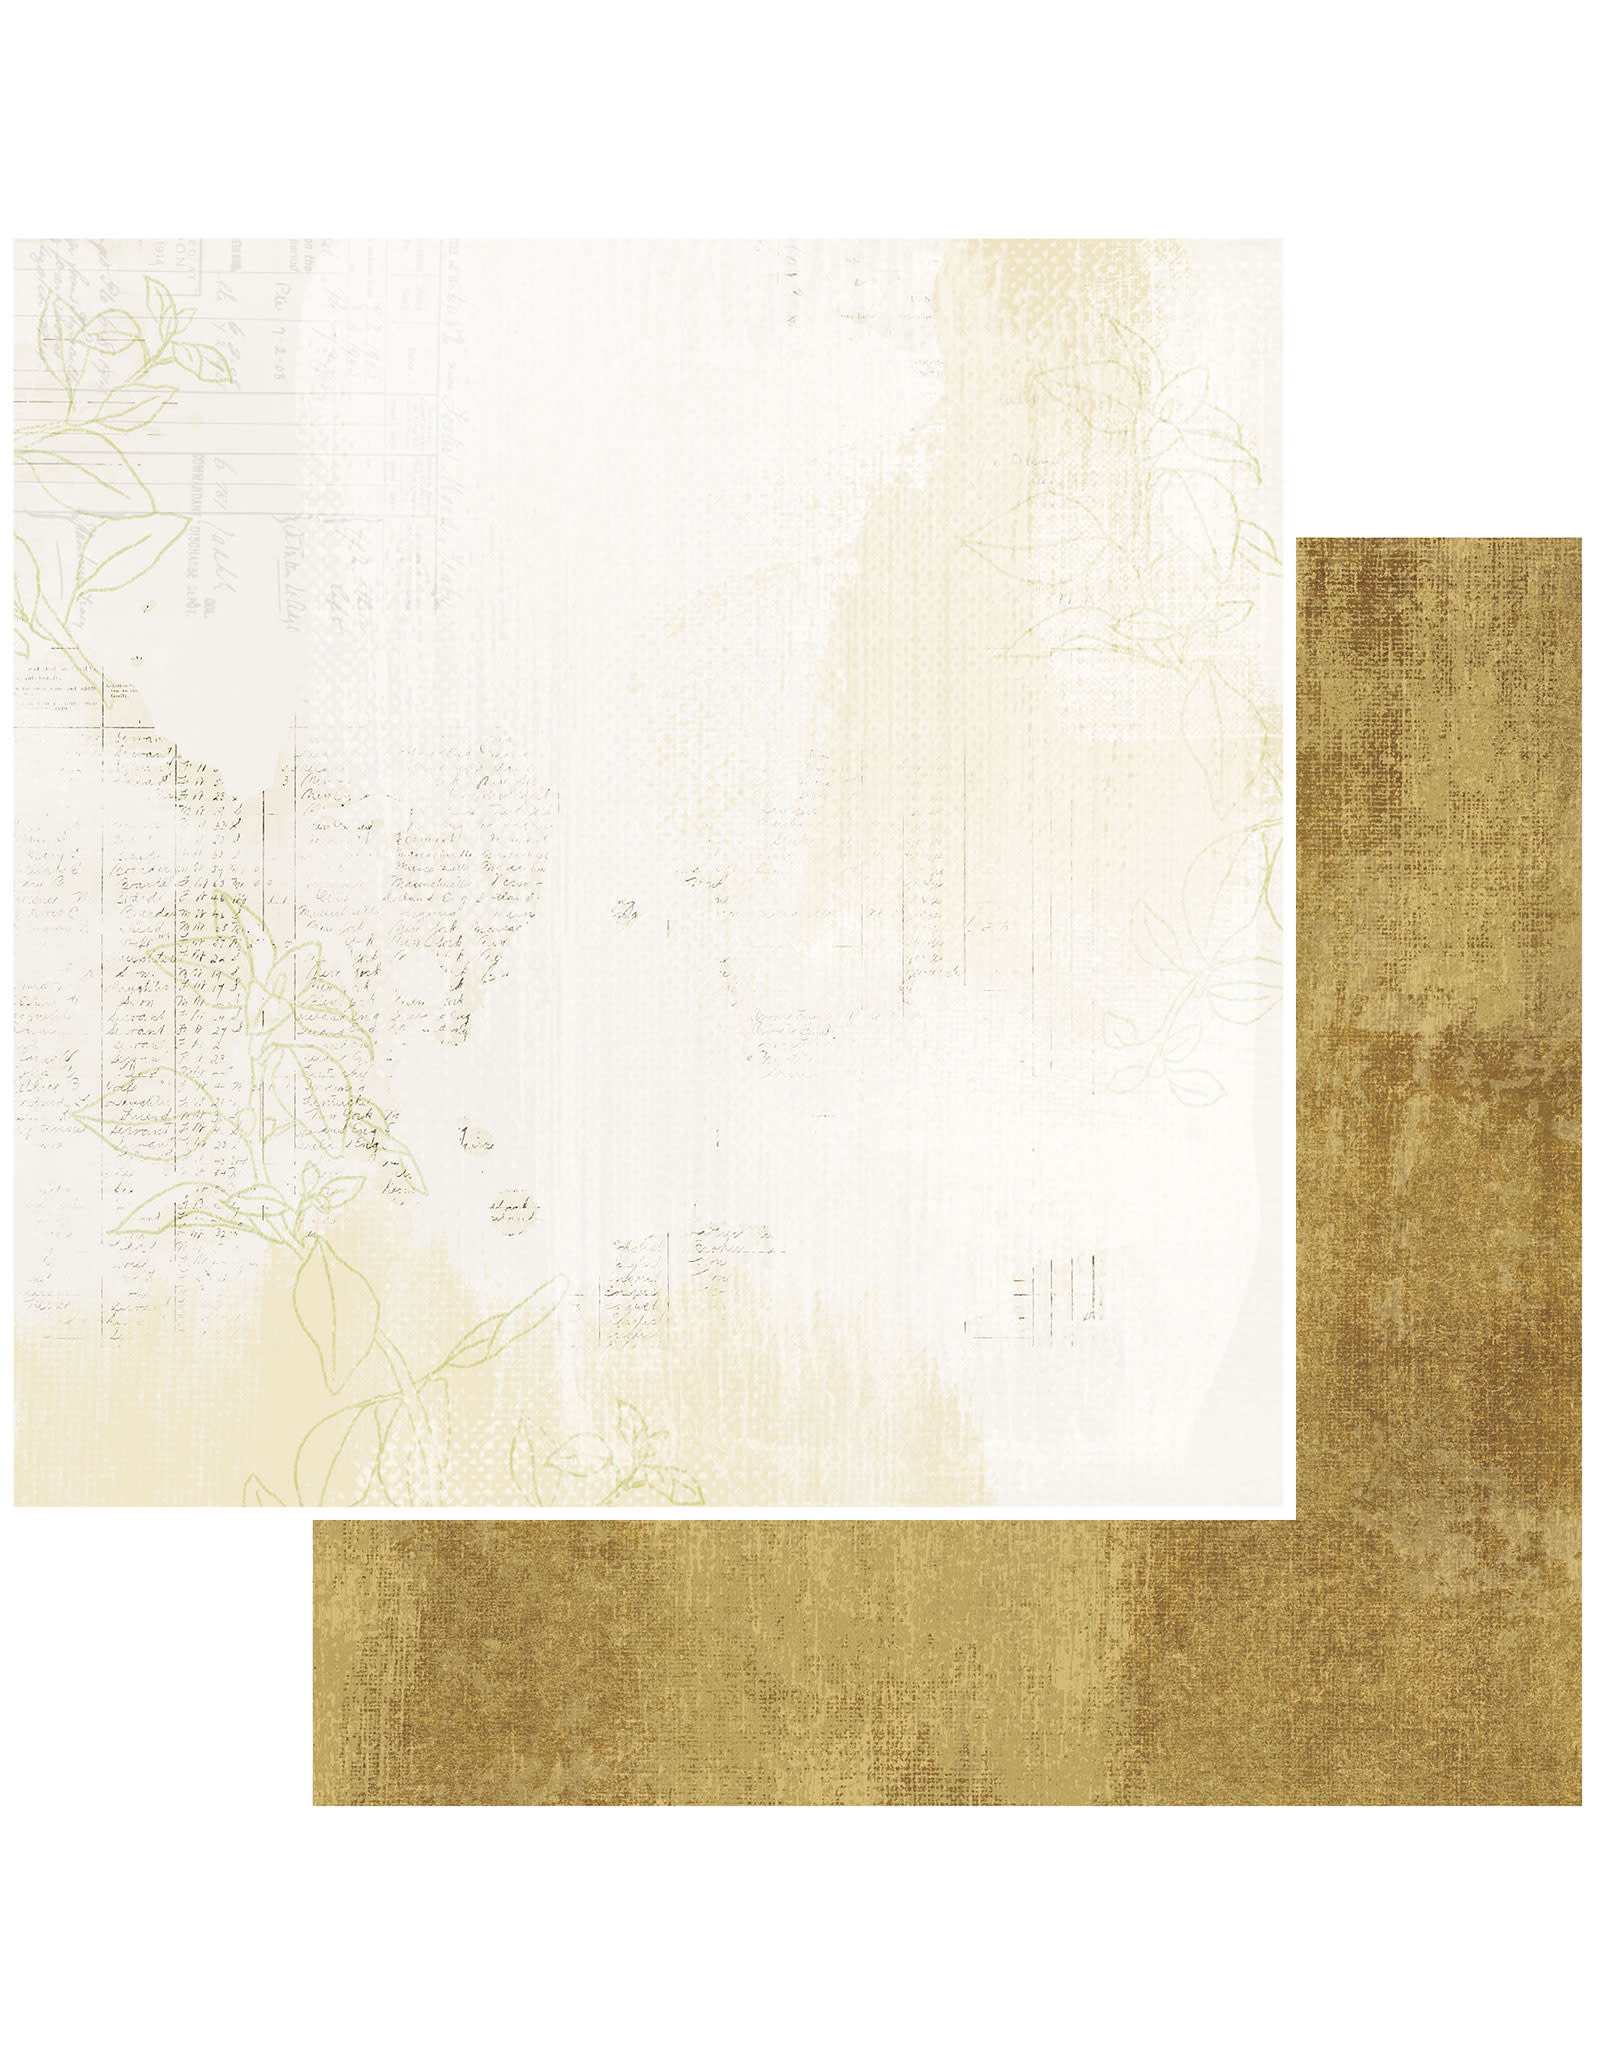 49 AND MARKET 12X12 Patterned Paper, Vintage Artistry Everyday - Golden Dream